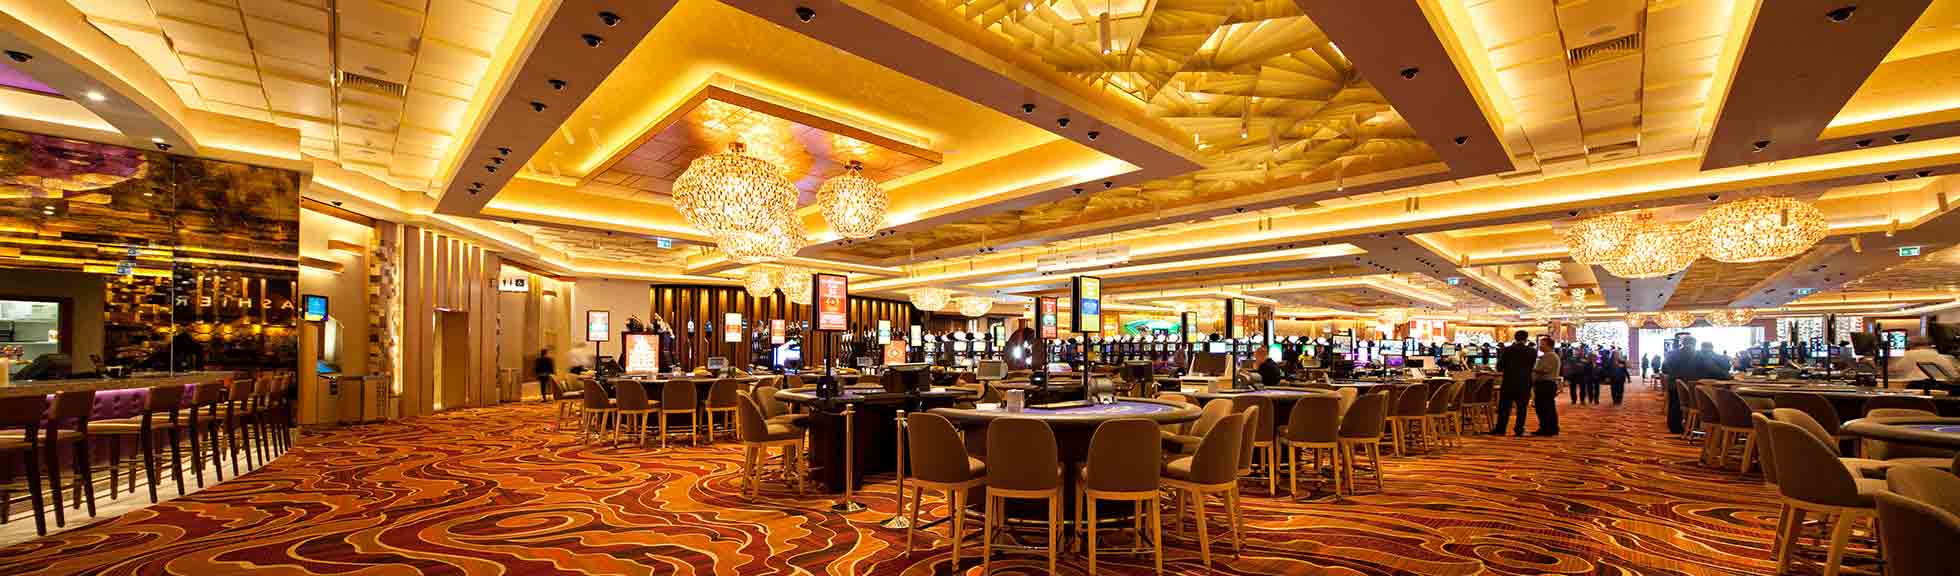 Although they were caught, the duo that took Australia's Crown Casino for over $30 mil suffered minimal consequences after being discovered. (Source: CrownPerth.com.au)